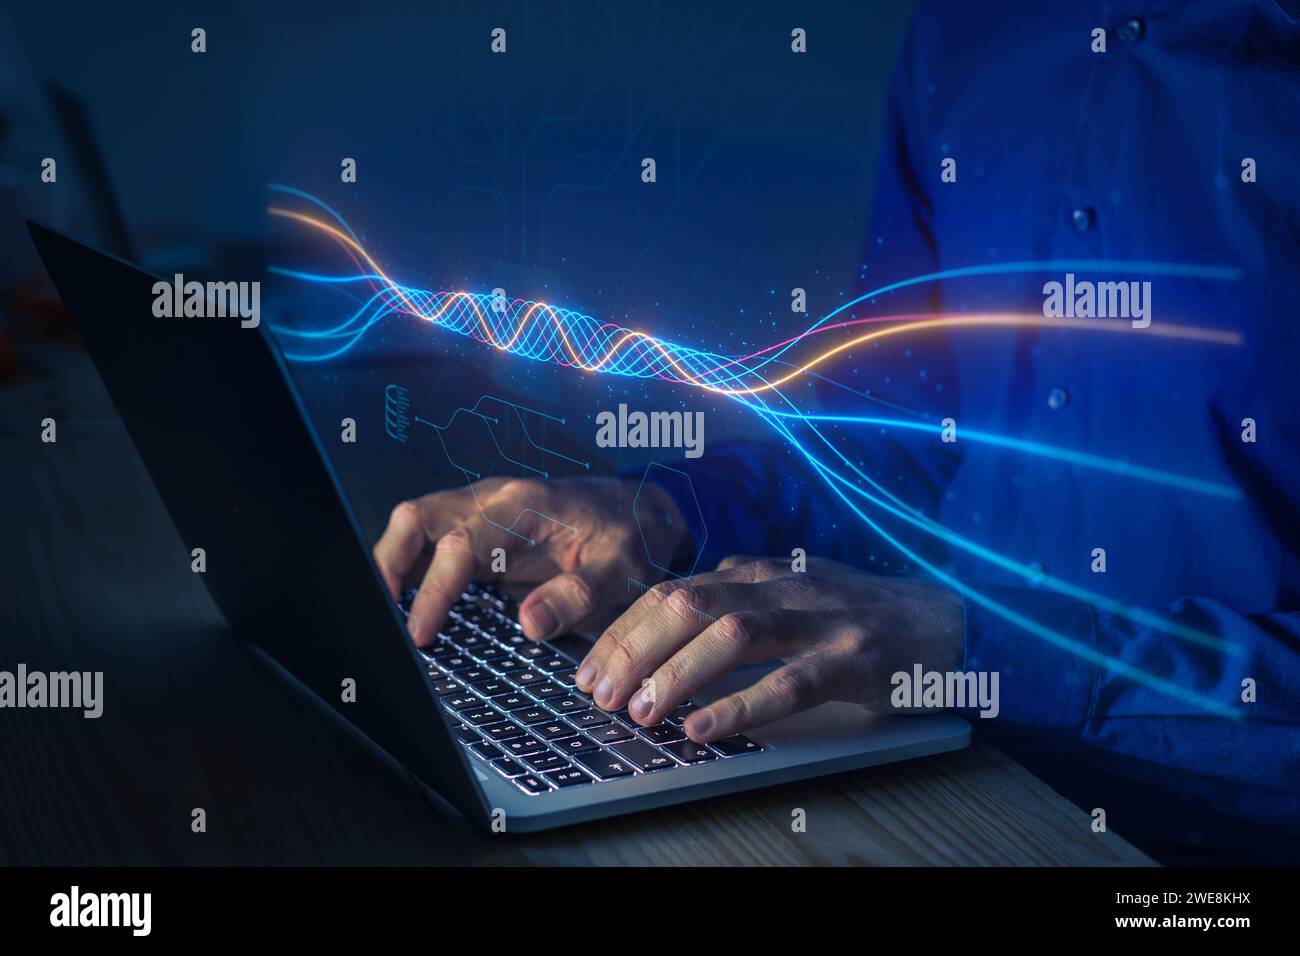 AI analyzing big data. Machine learning and deep learning technology. Data scientist working on data model on computer. Innovation, finance, business Stock Photo